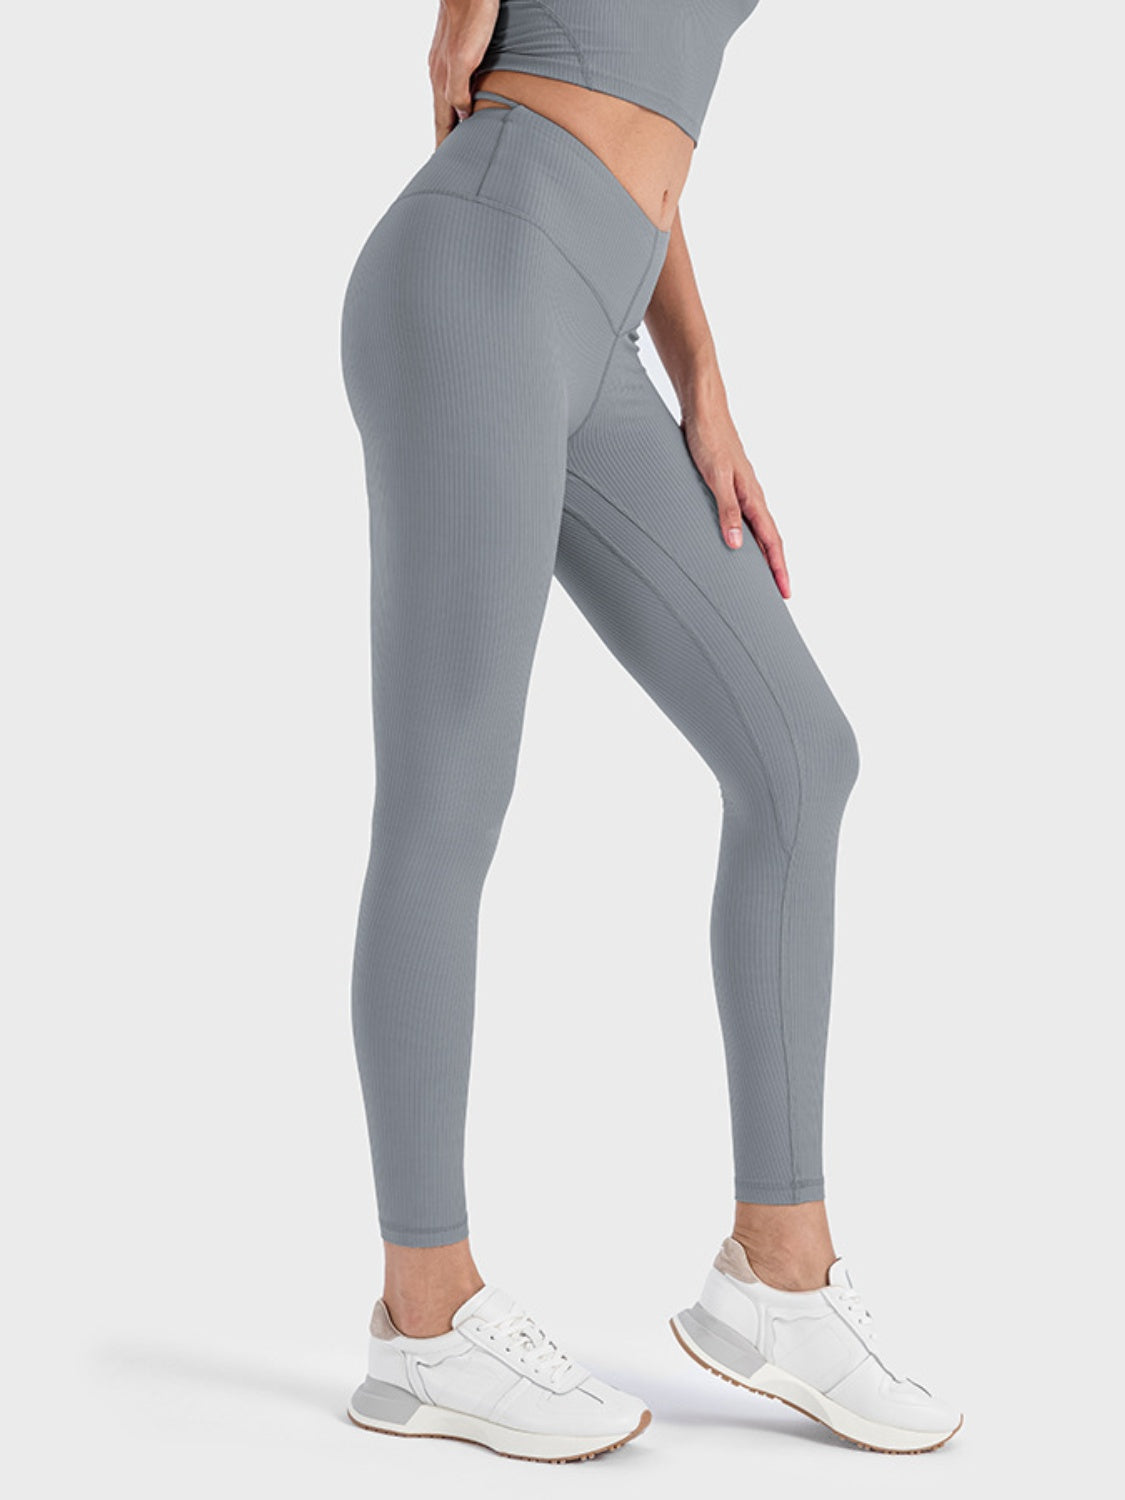 Lavender Wide Waistband Sports Leggings Sentient Beauty Fashions Activewear